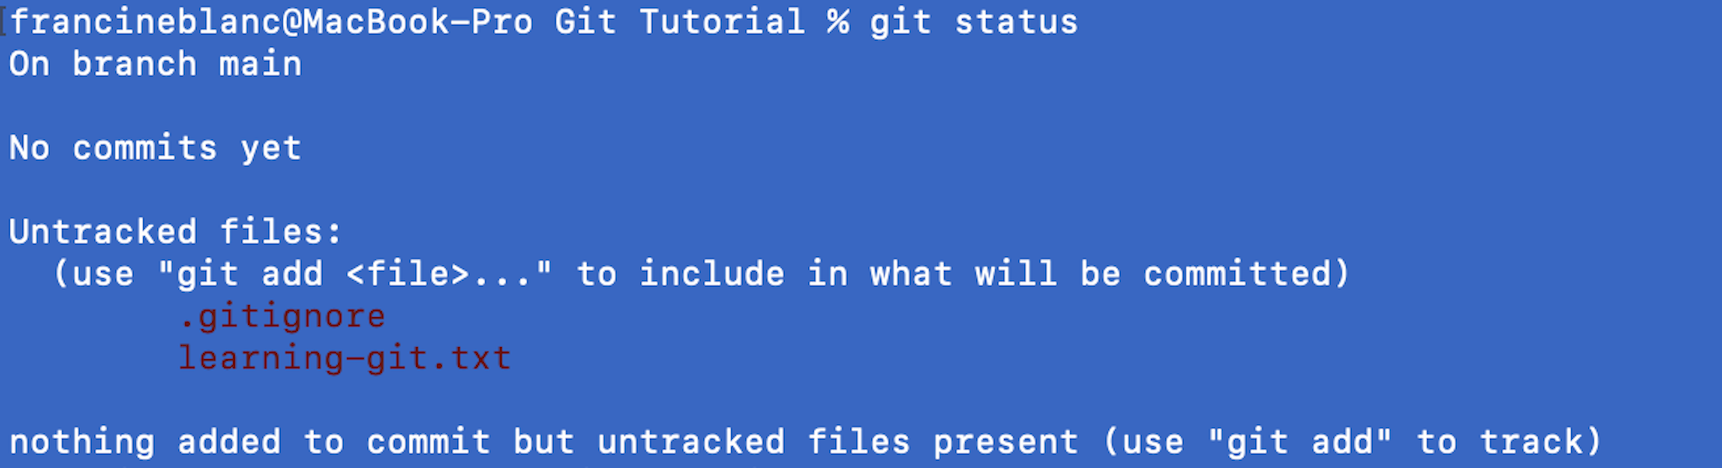 Image of git status command being run with gitignore file added